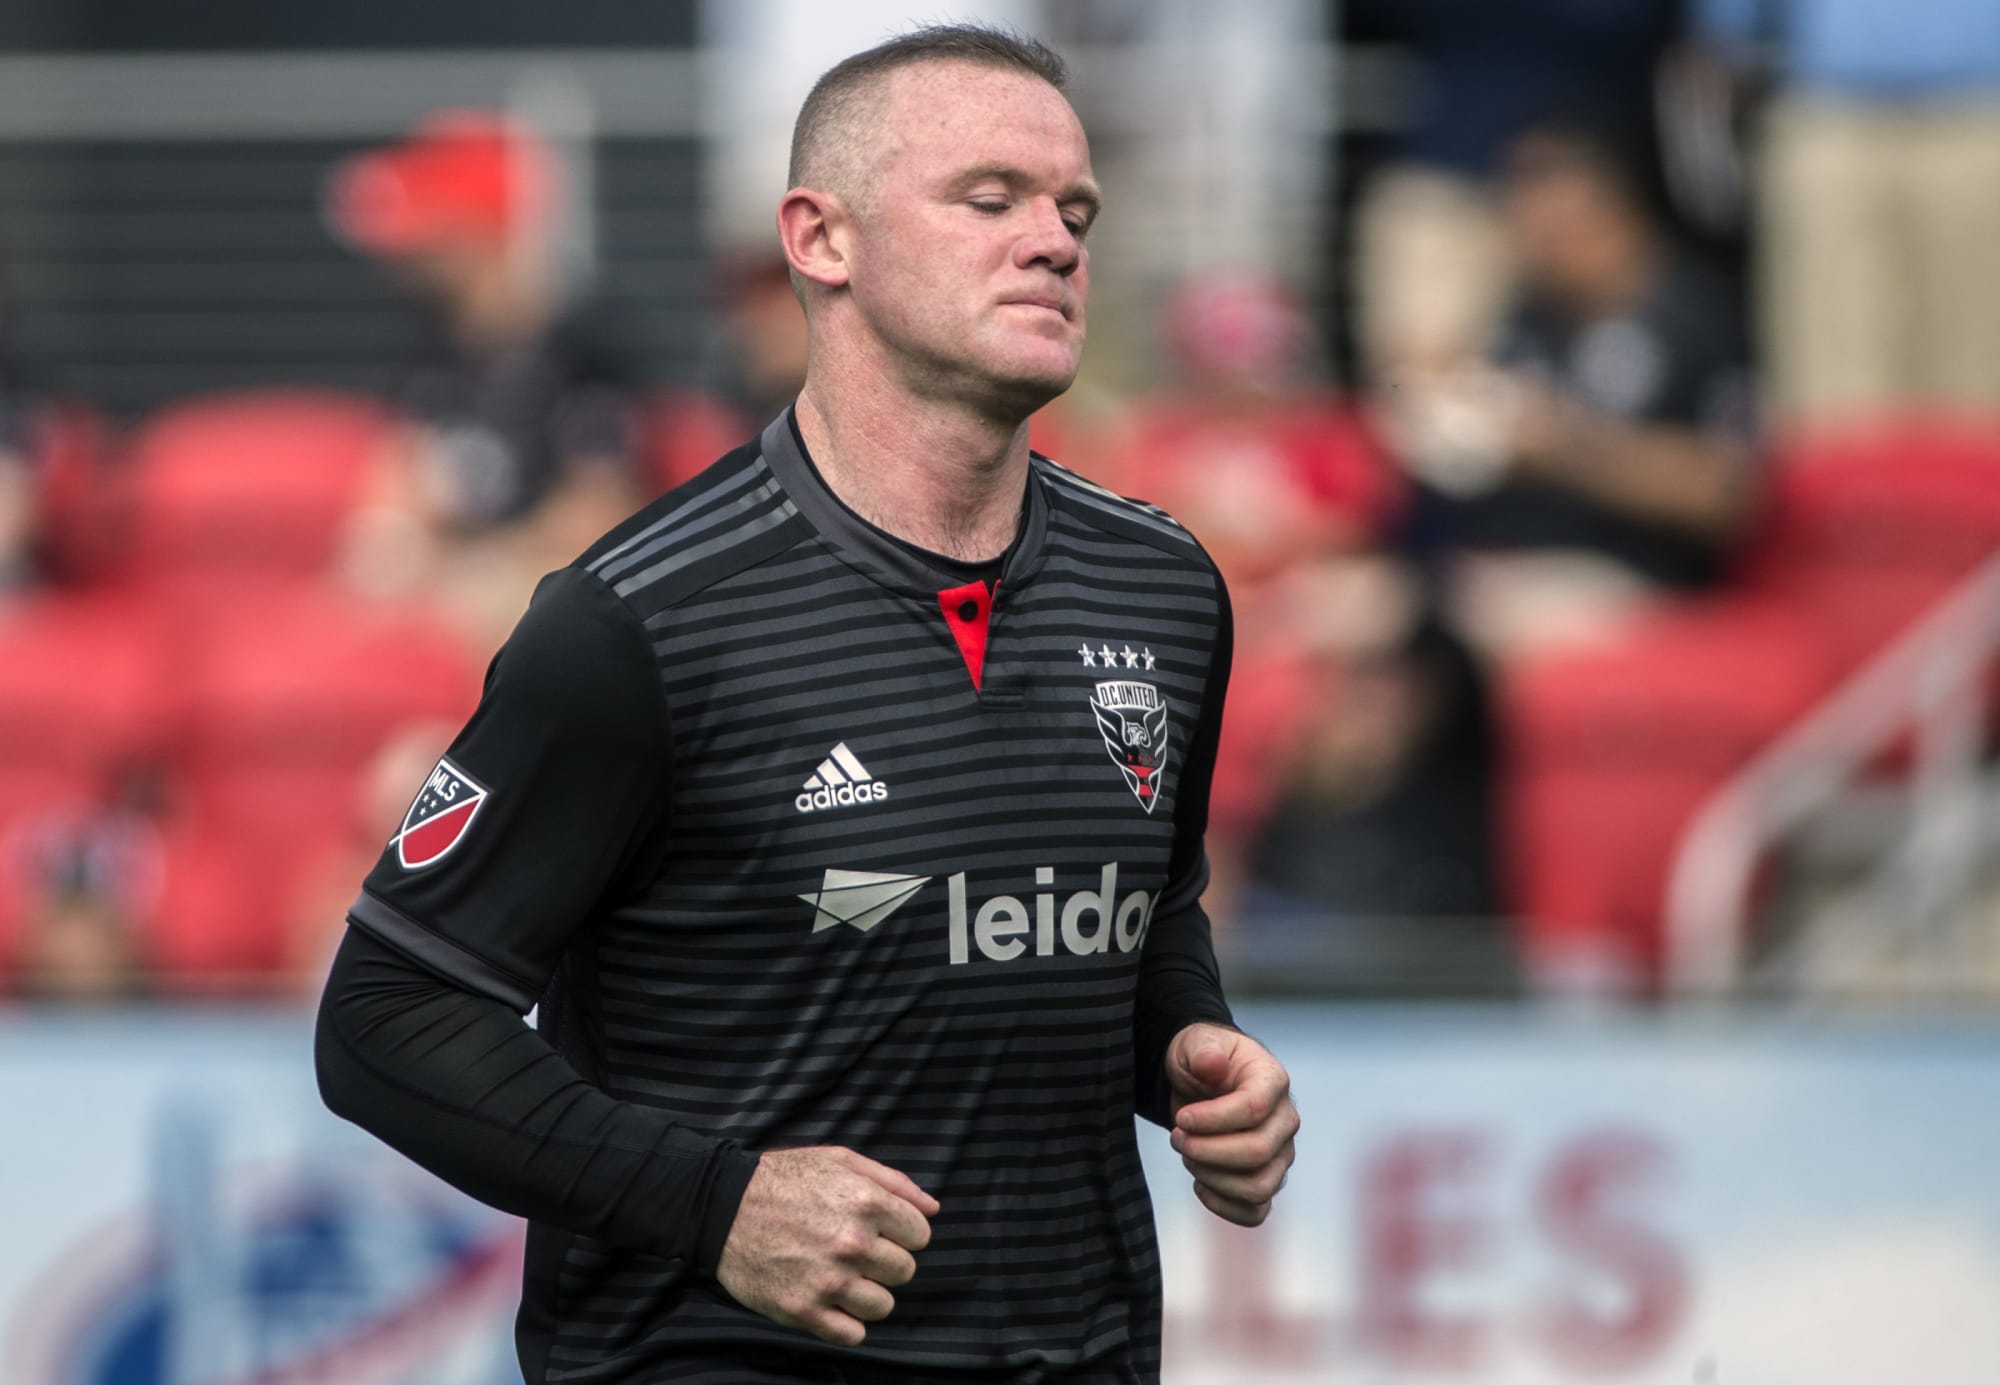 D.C. United: The underrated victory